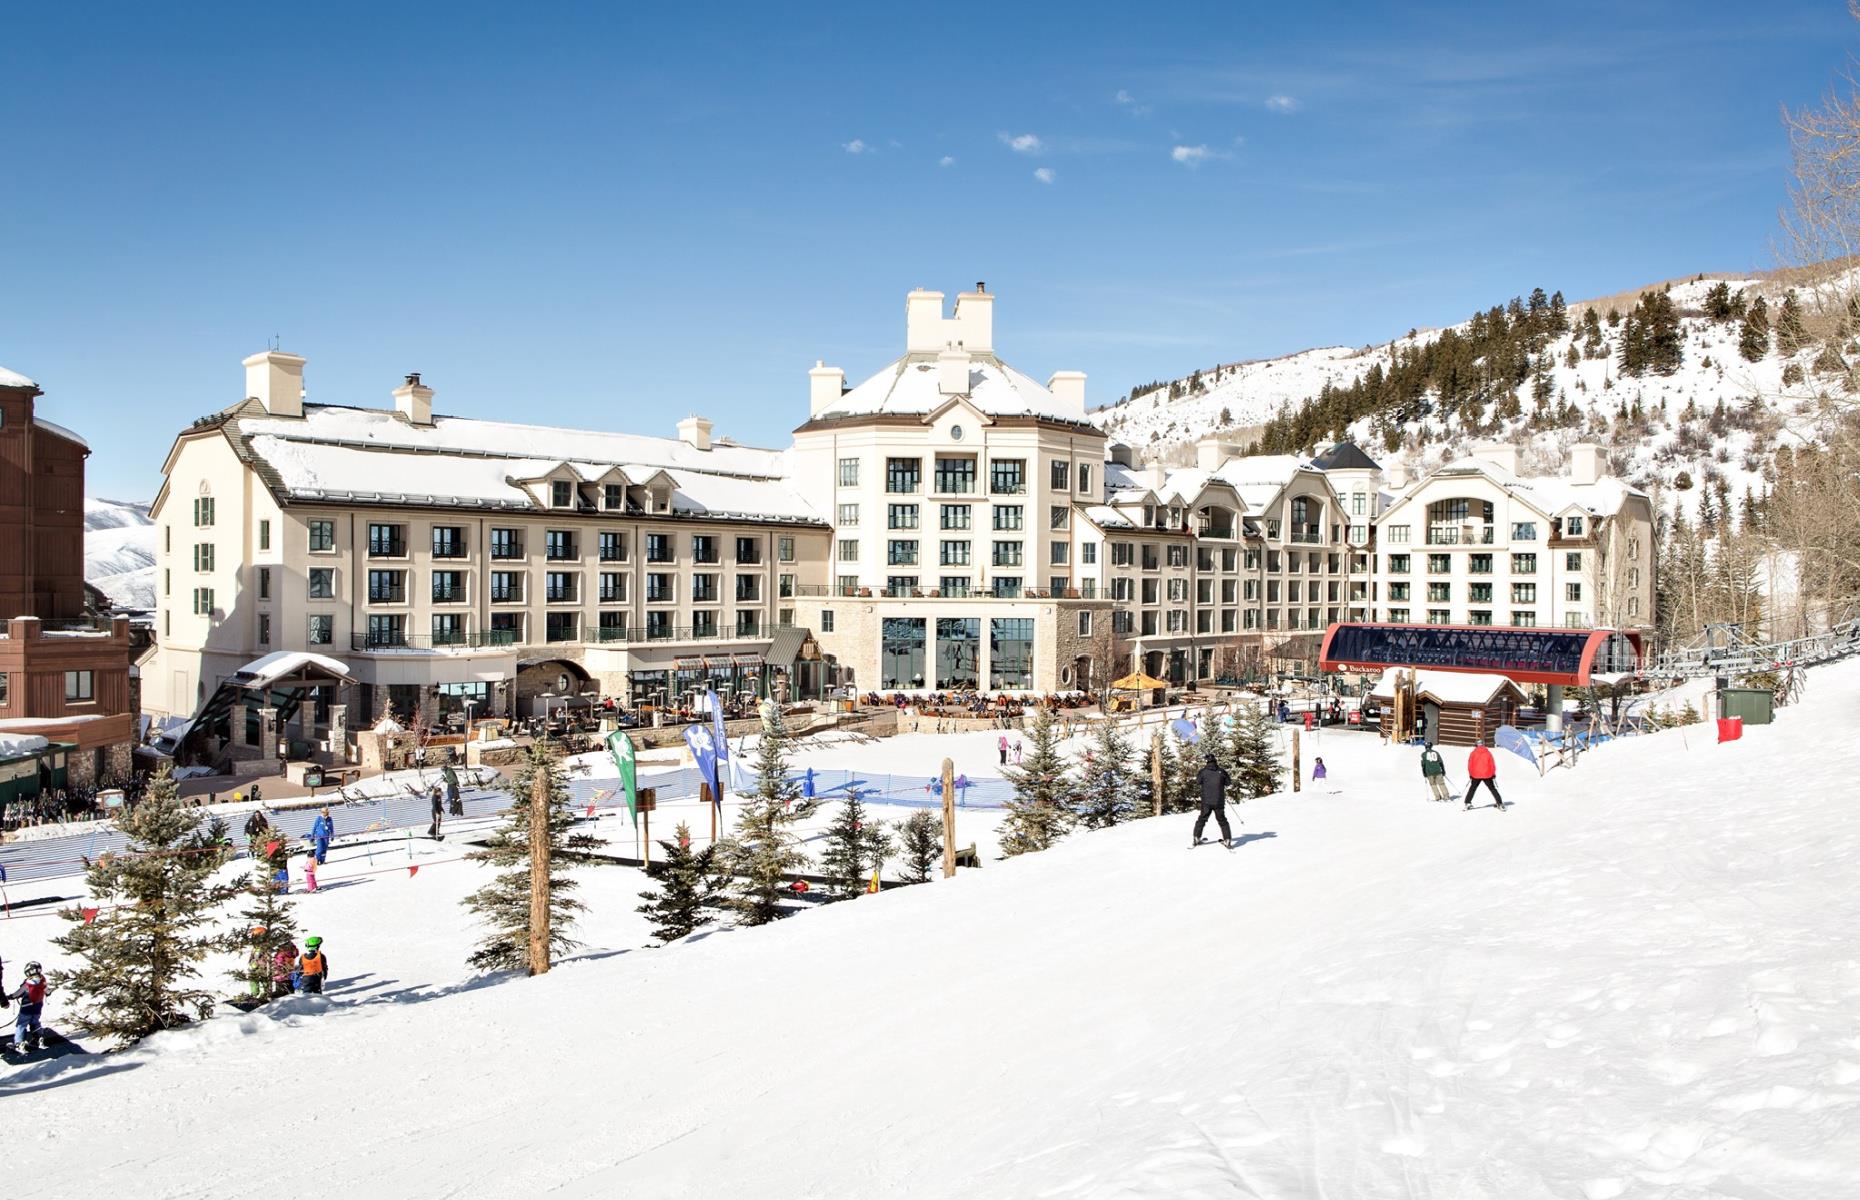 <p>One of the most lavish lodgings in Colorado's many ski areas, this <a href="https://www.hyatt.com/en-US/hotel/colorado/park-hyatt-beaver-creek-resort-and-spa/beave">Vail Valley retreat</a> sits in the middle of the famed Beaver Creek ski resort, offering ski-in/ski-out convenience along with the opportunity to try snowshoes and skimobiles. In the summer, visitors can go rafting or fly fishing, or just soak up the beauty of the hotel, enjoying the pool, spa treatments and mountain-style cuisine.</p>